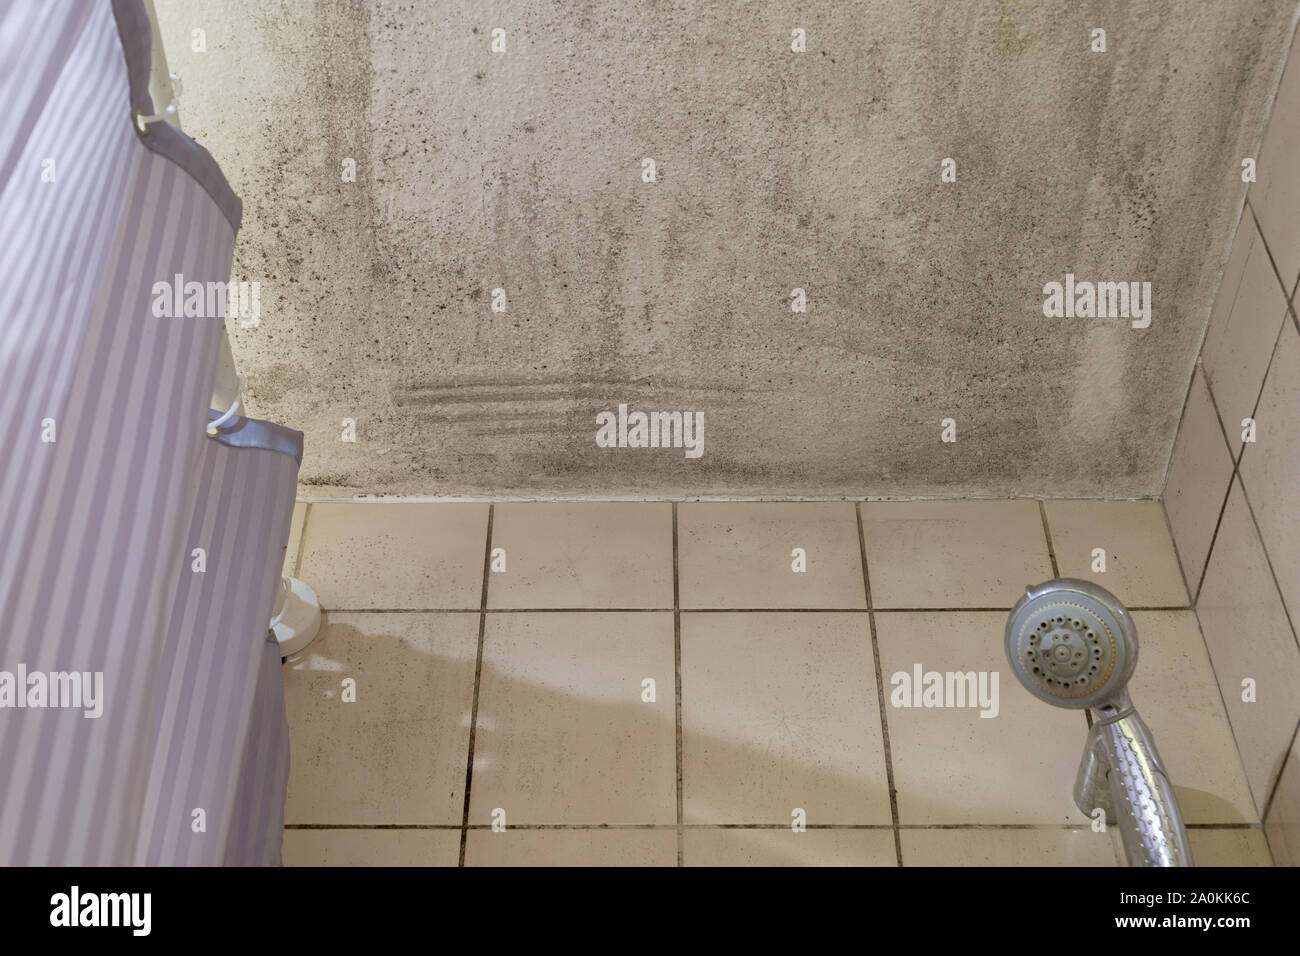 Shower Ceiling Stock Photos Shower Ceiling Stock Images Alamy